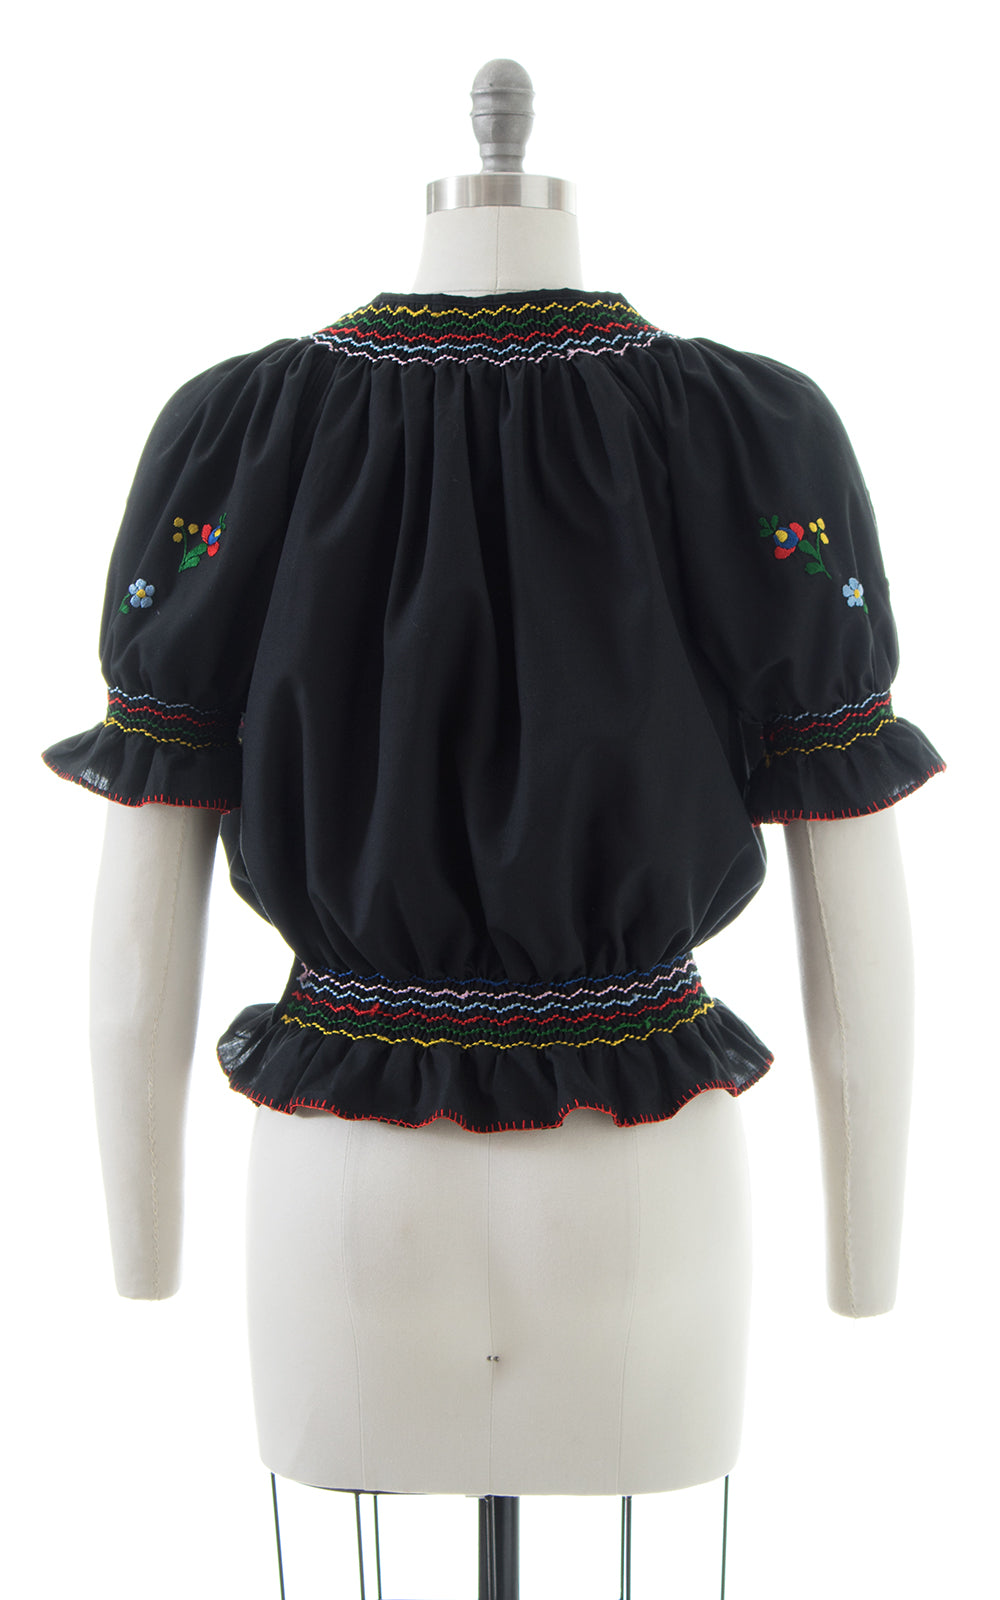 1930s Style Floral Embroidered Peasant Top